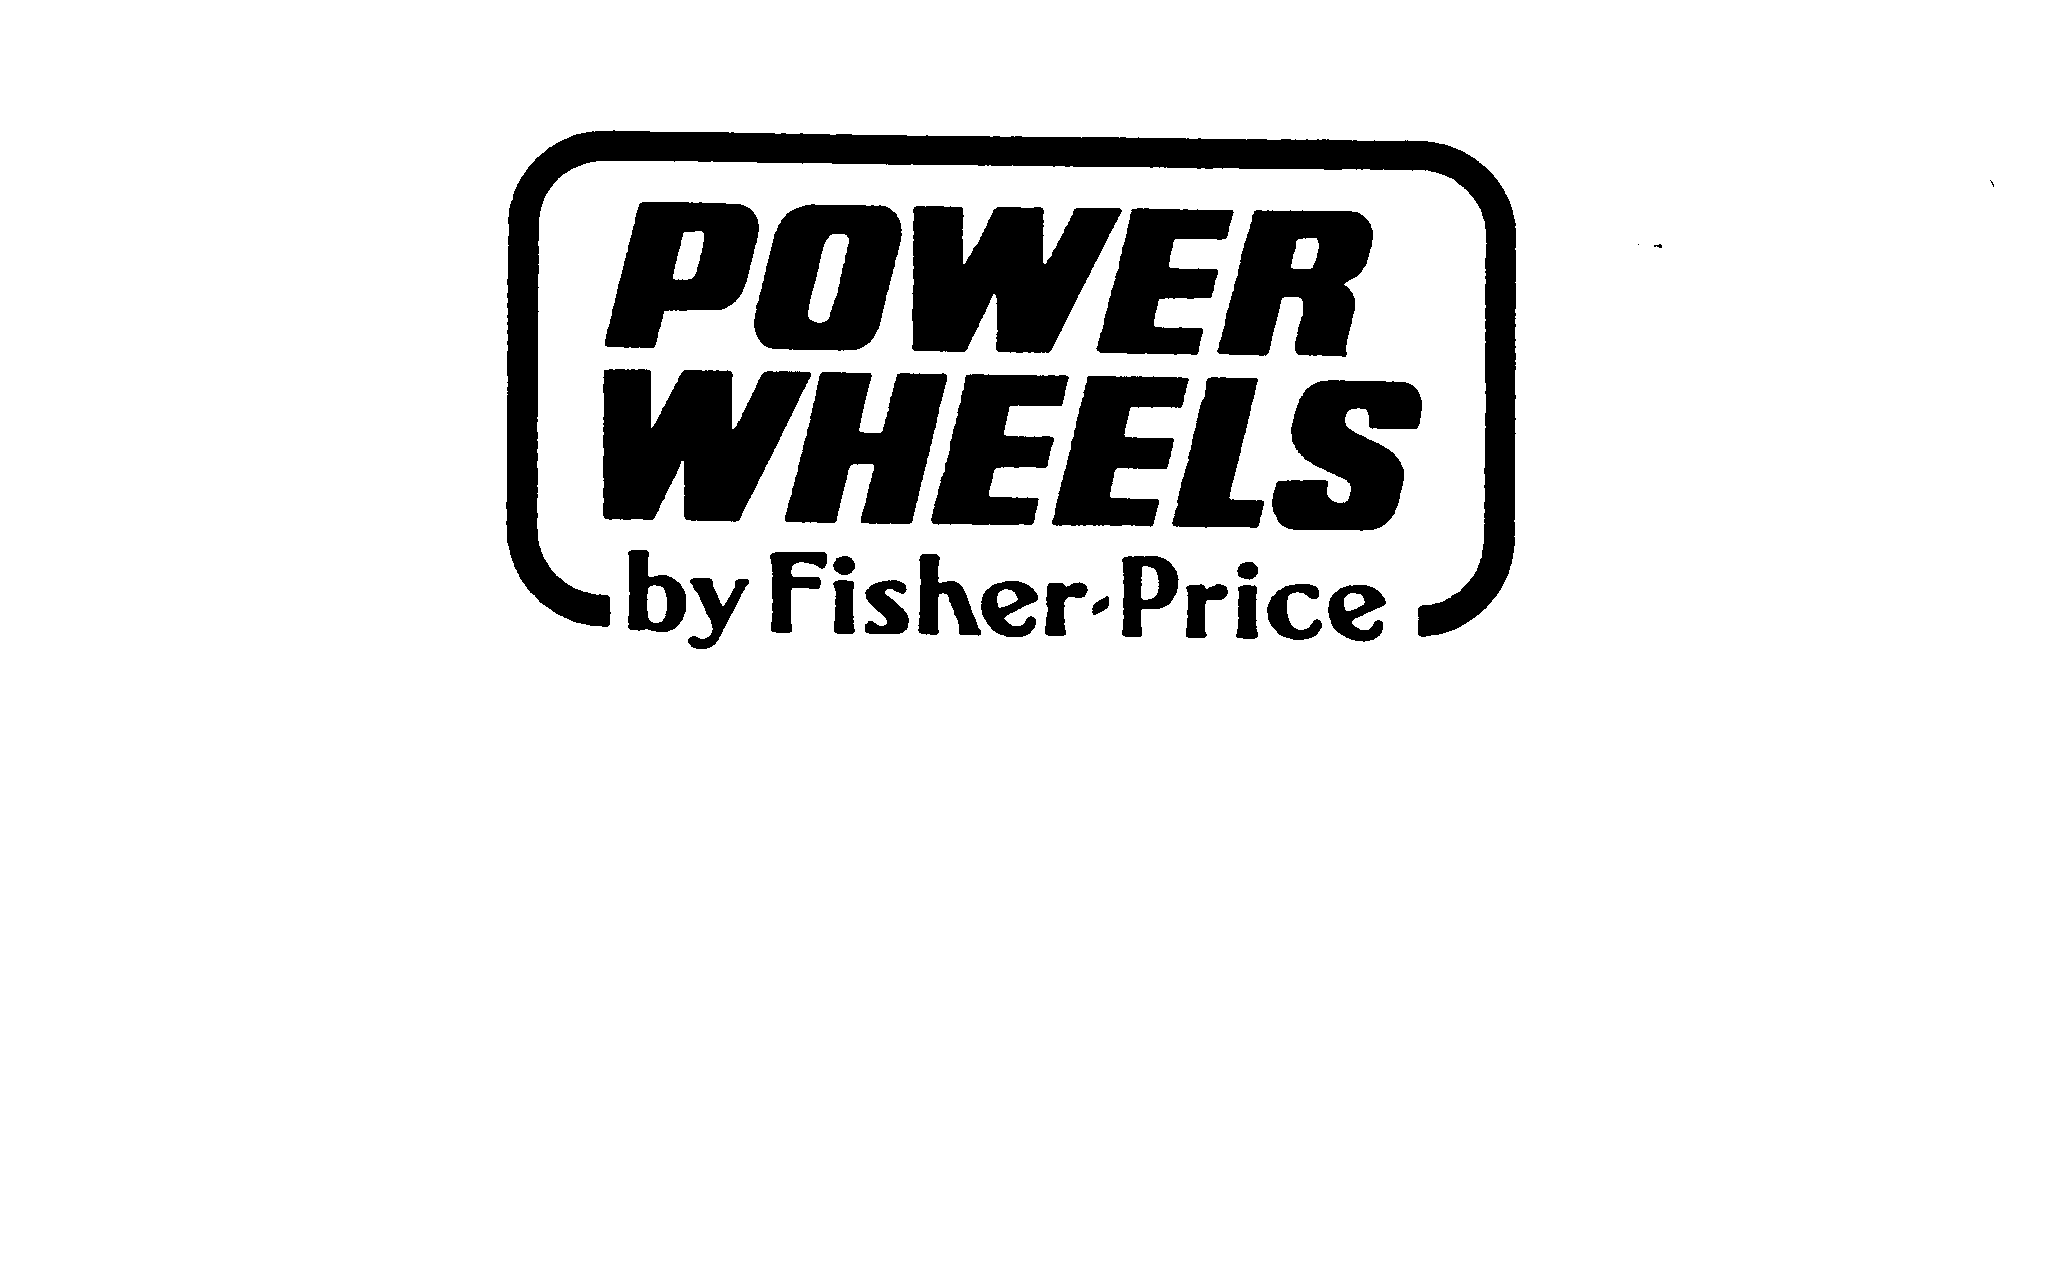  POWER WHEELS BY FISHER-PRICE